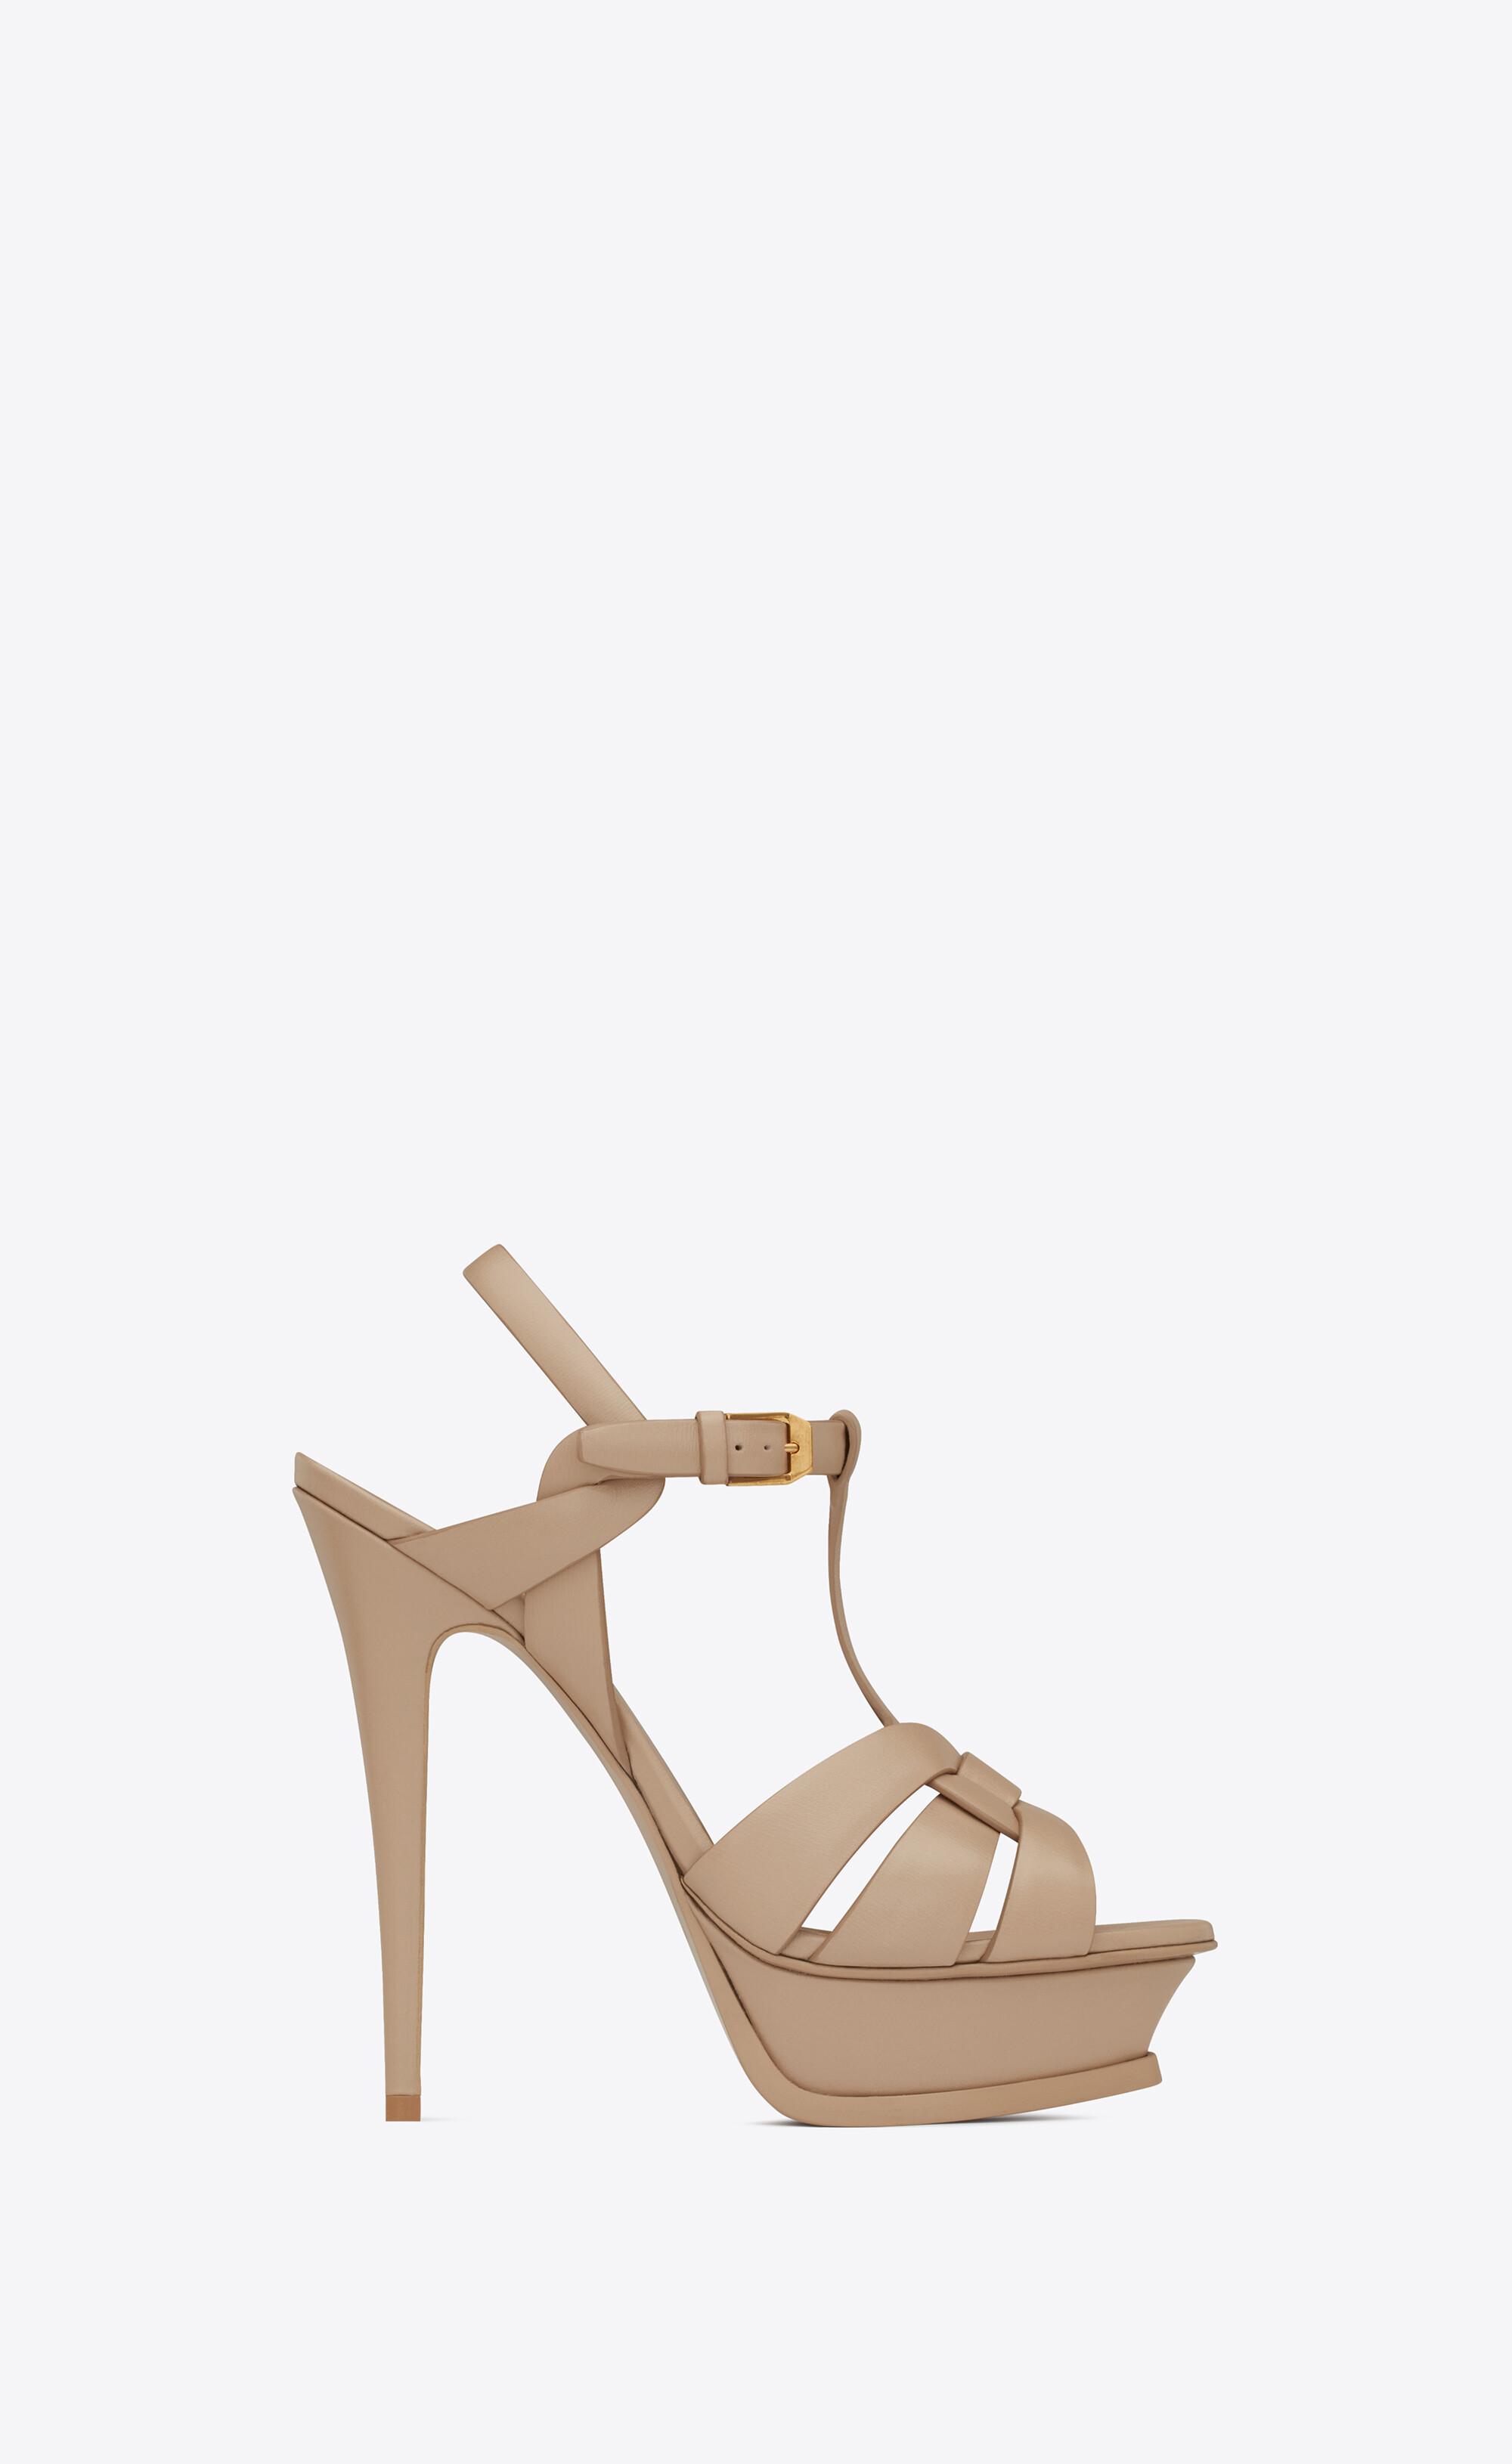 Saint Laurent Tribute Platform Sandals In Smooth Leather in Natural | Lyst